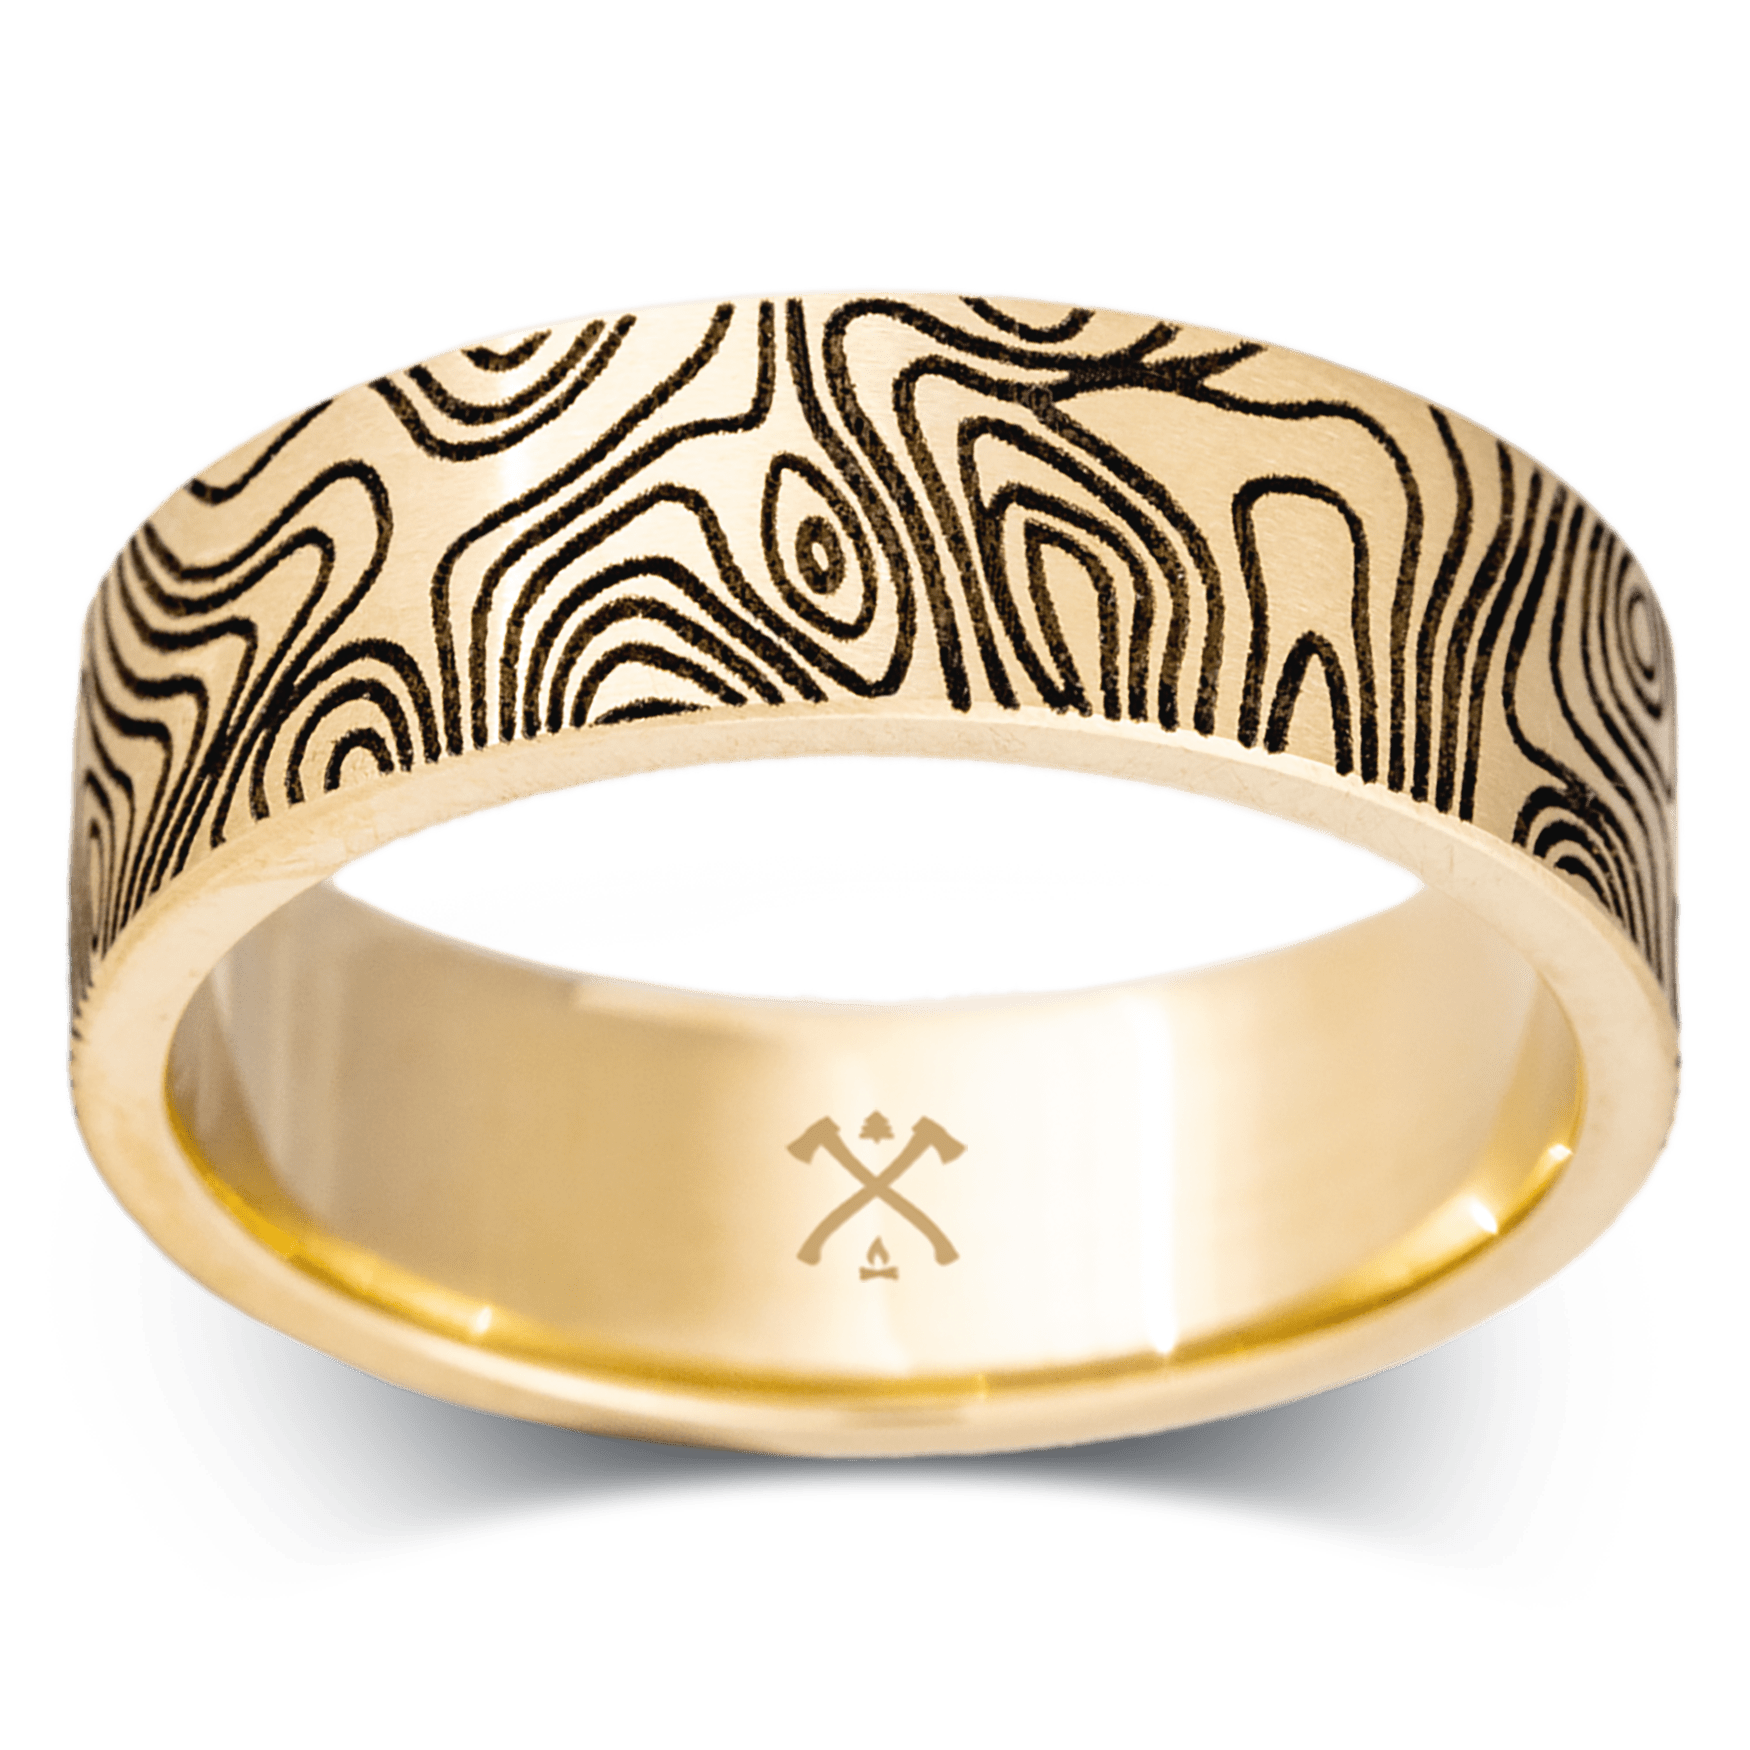 The Mercator - Men's Wedding Rings - Manly Bands